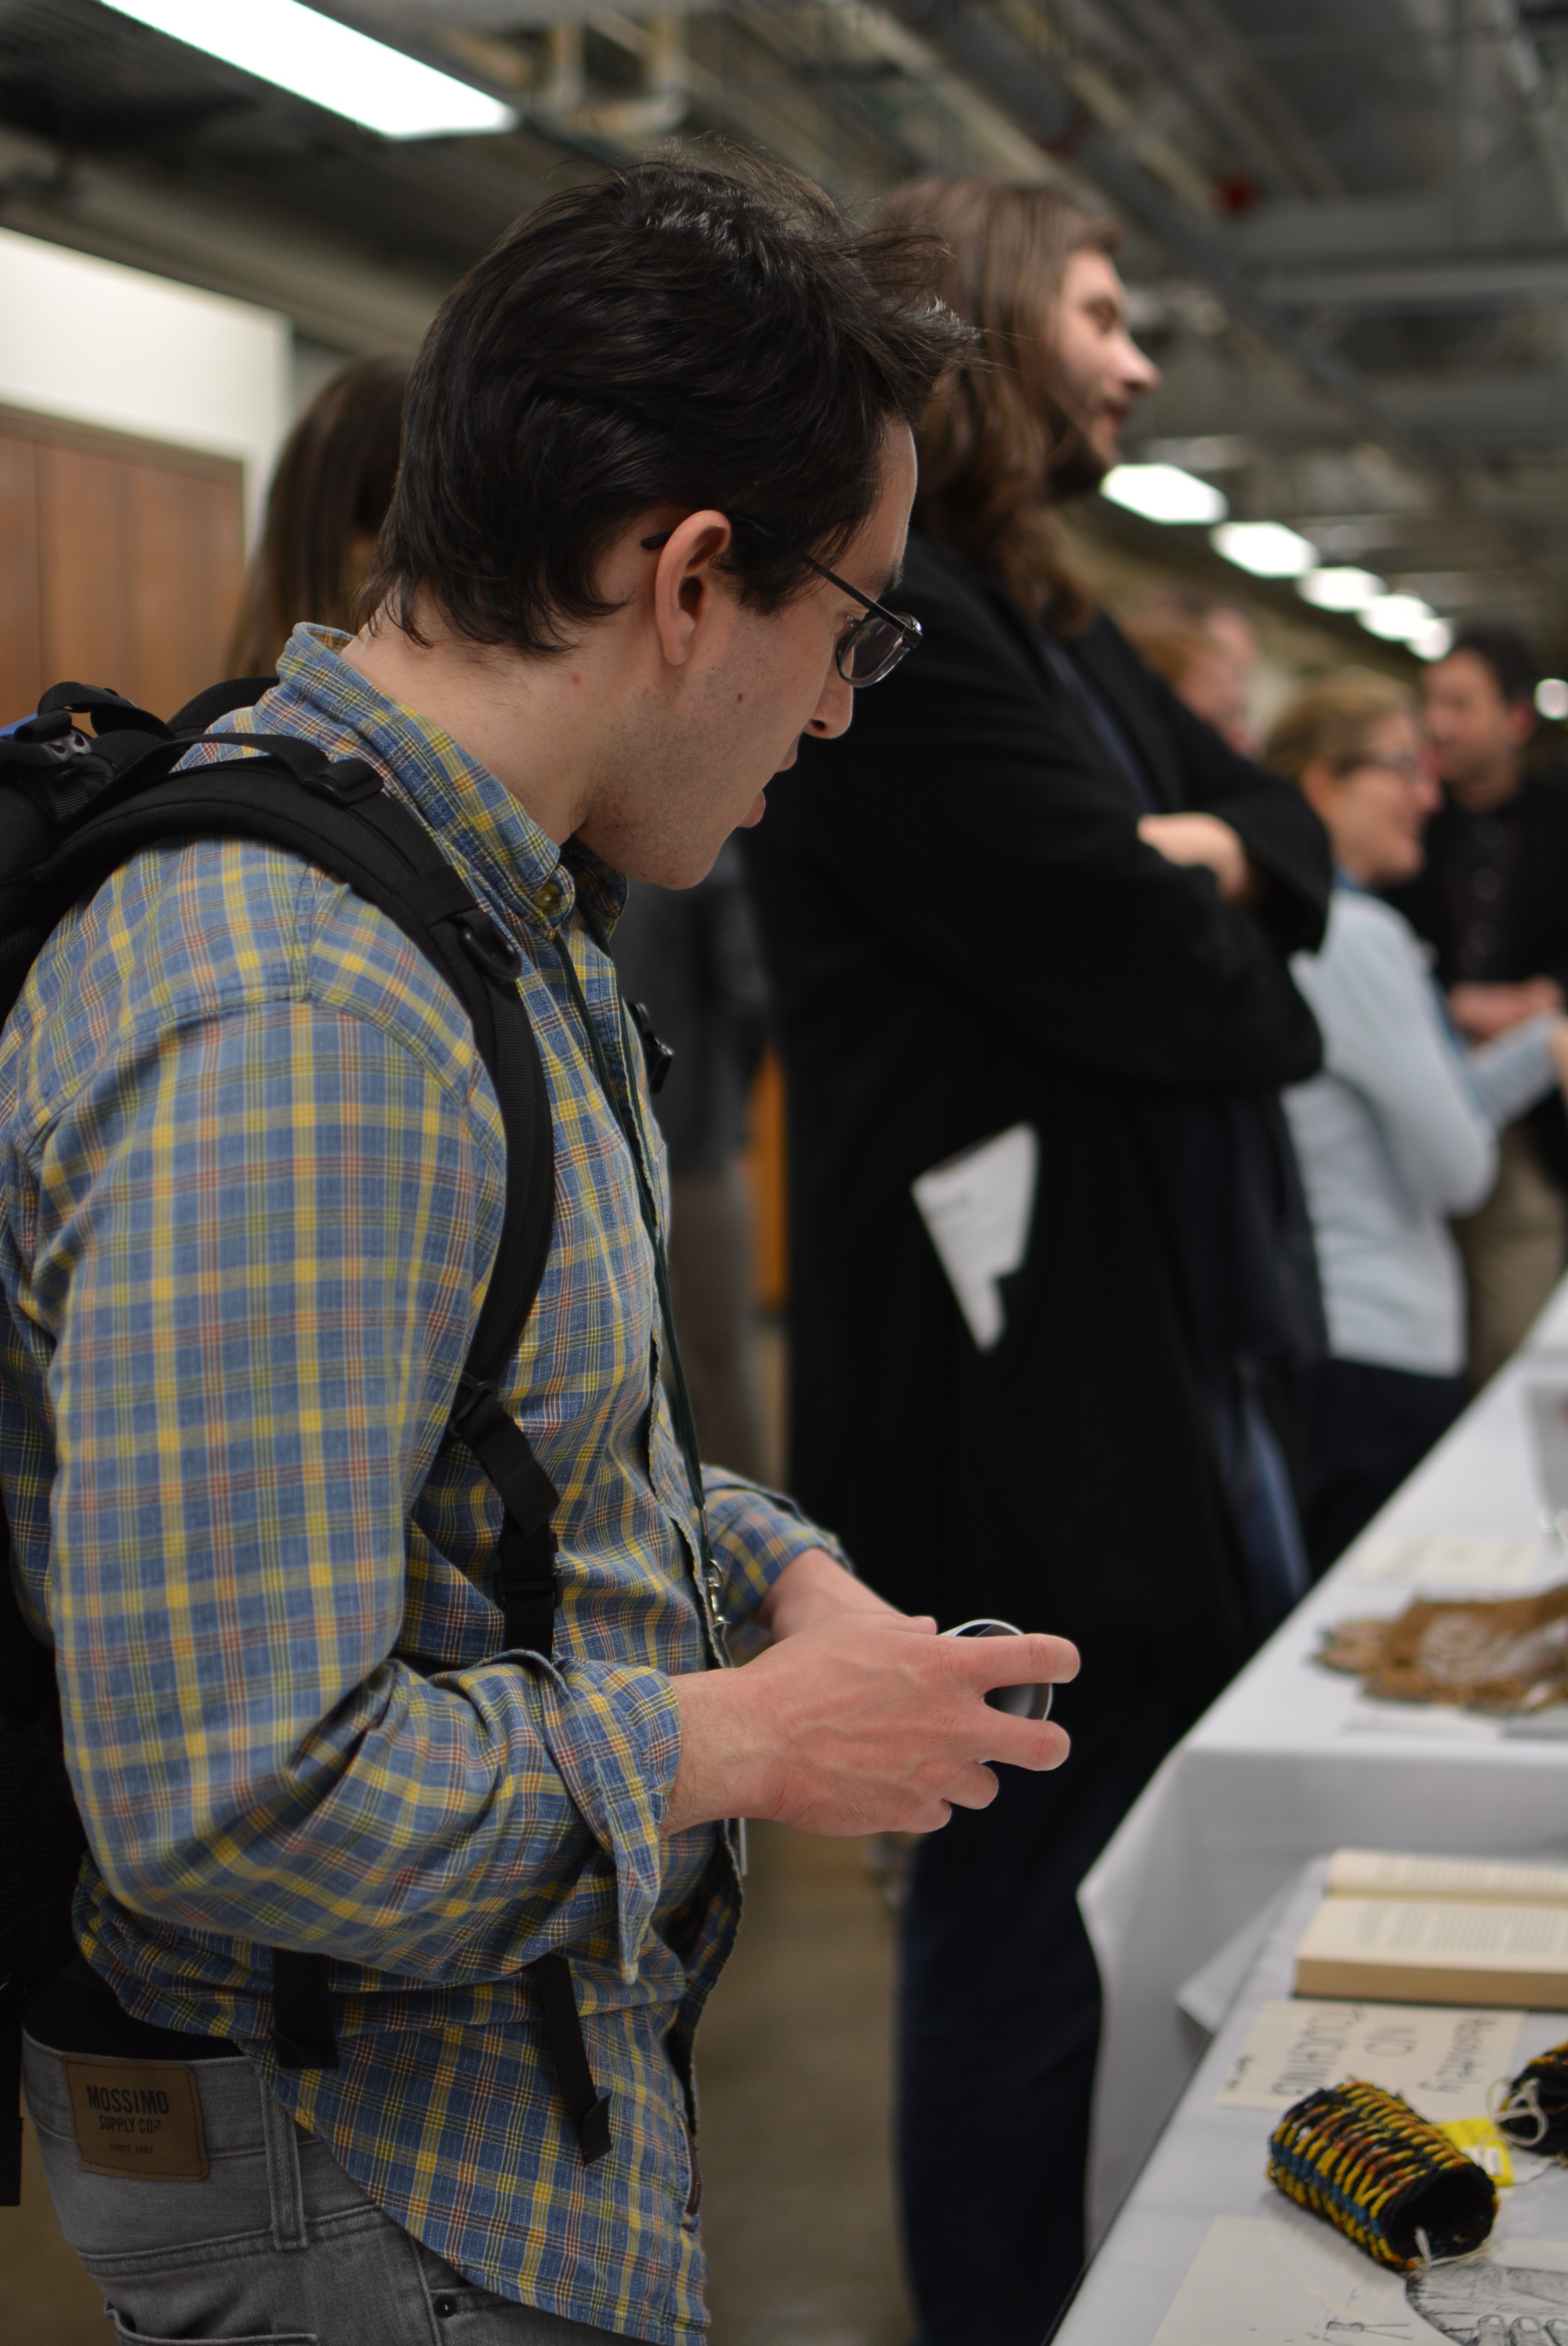 A guest pauses to get a good look at the artifacts on display. (c) Field Museum of Natural History - CC BY-NC 4.0